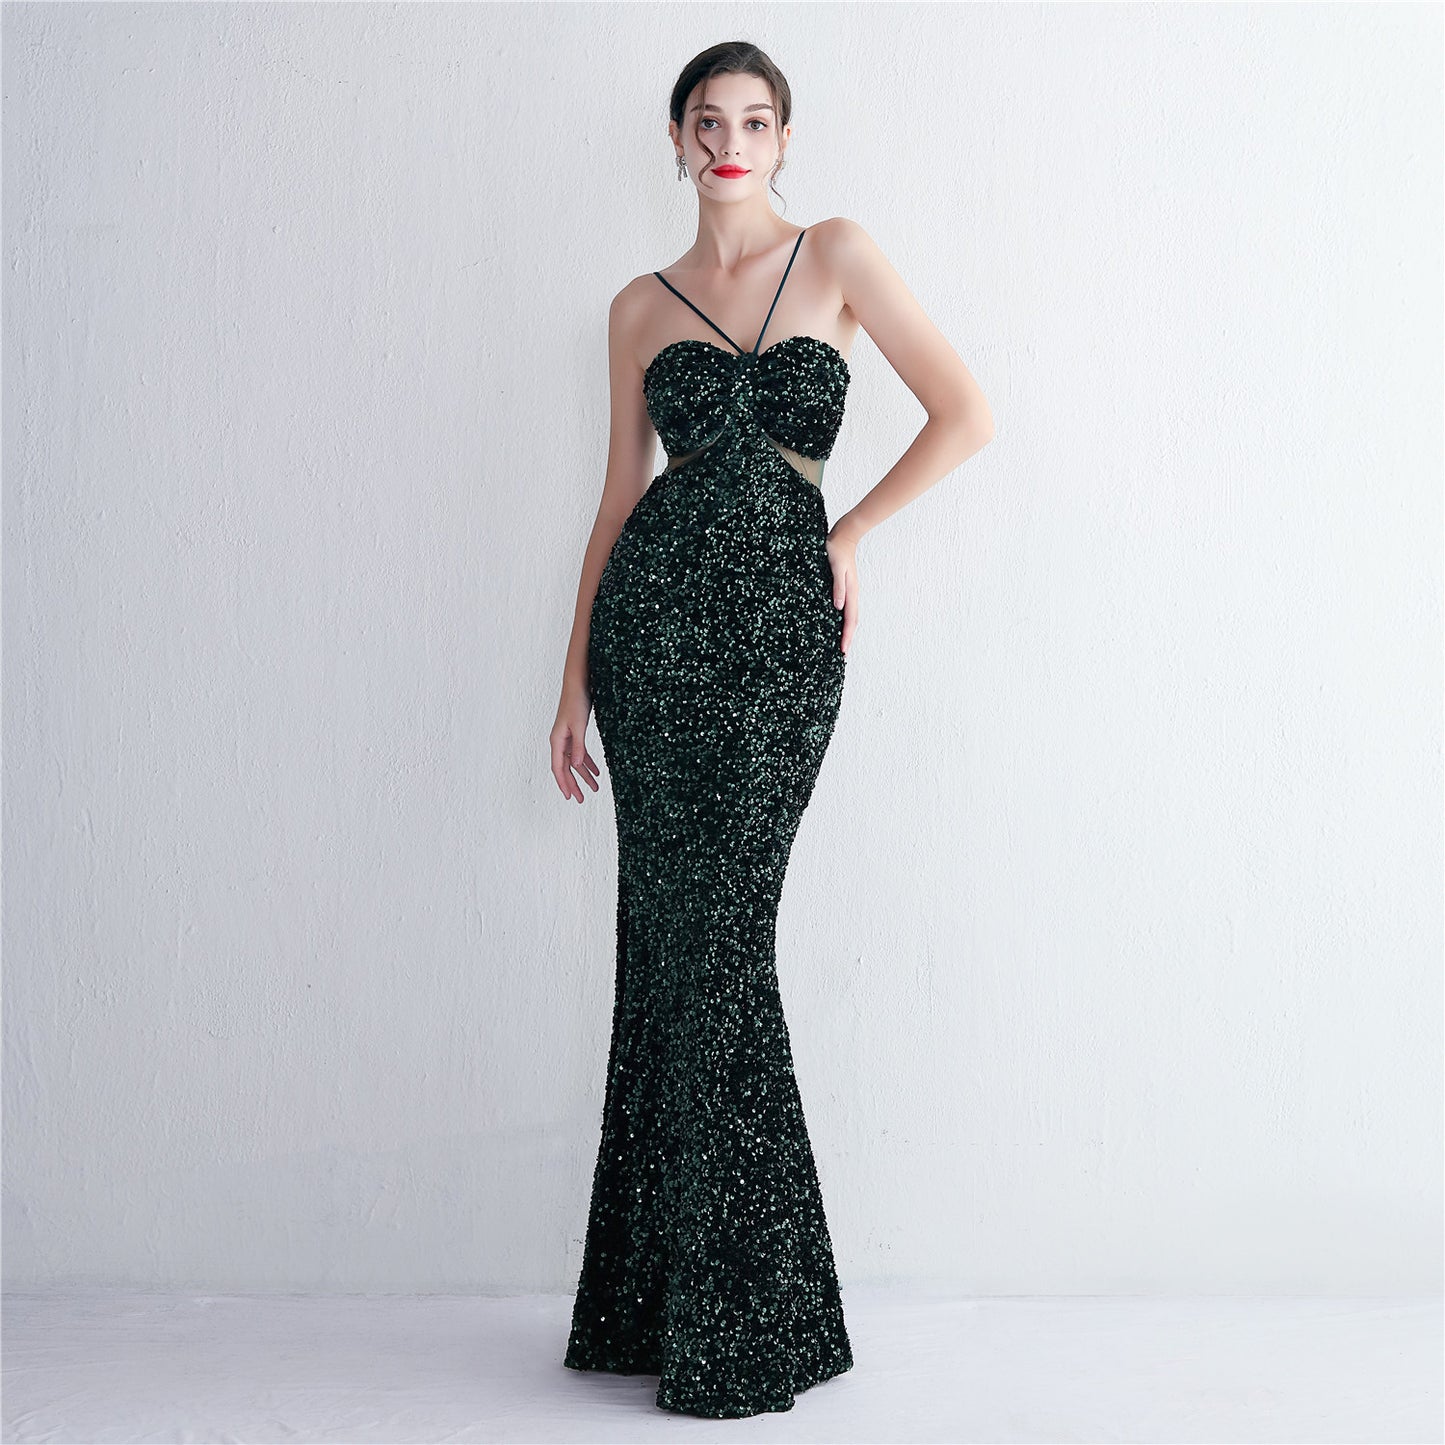 Cutout Sequin Gown